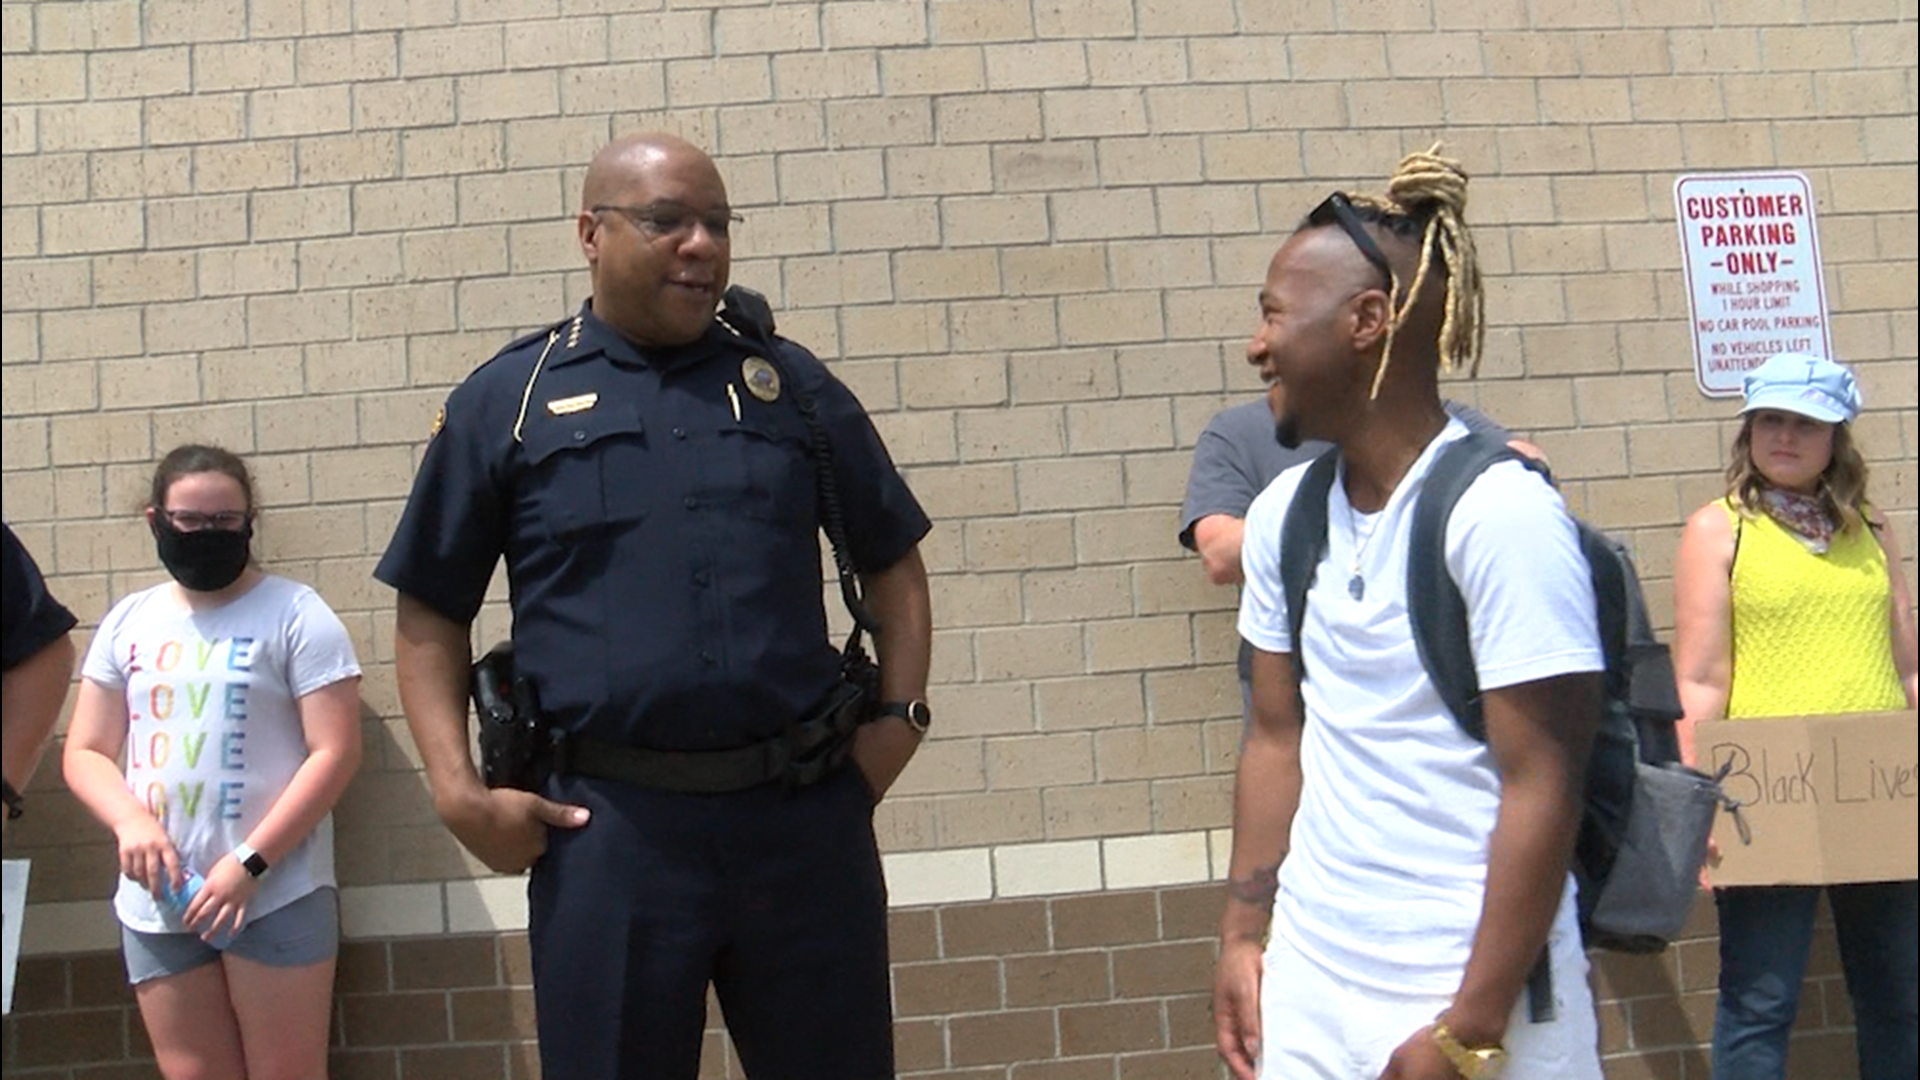 Kyreef Prezzy is 26 and black. Police were called on him for carrying Black Lives Matter signs last week. On Saturday, Ankeny PD joined him to carry the signs.